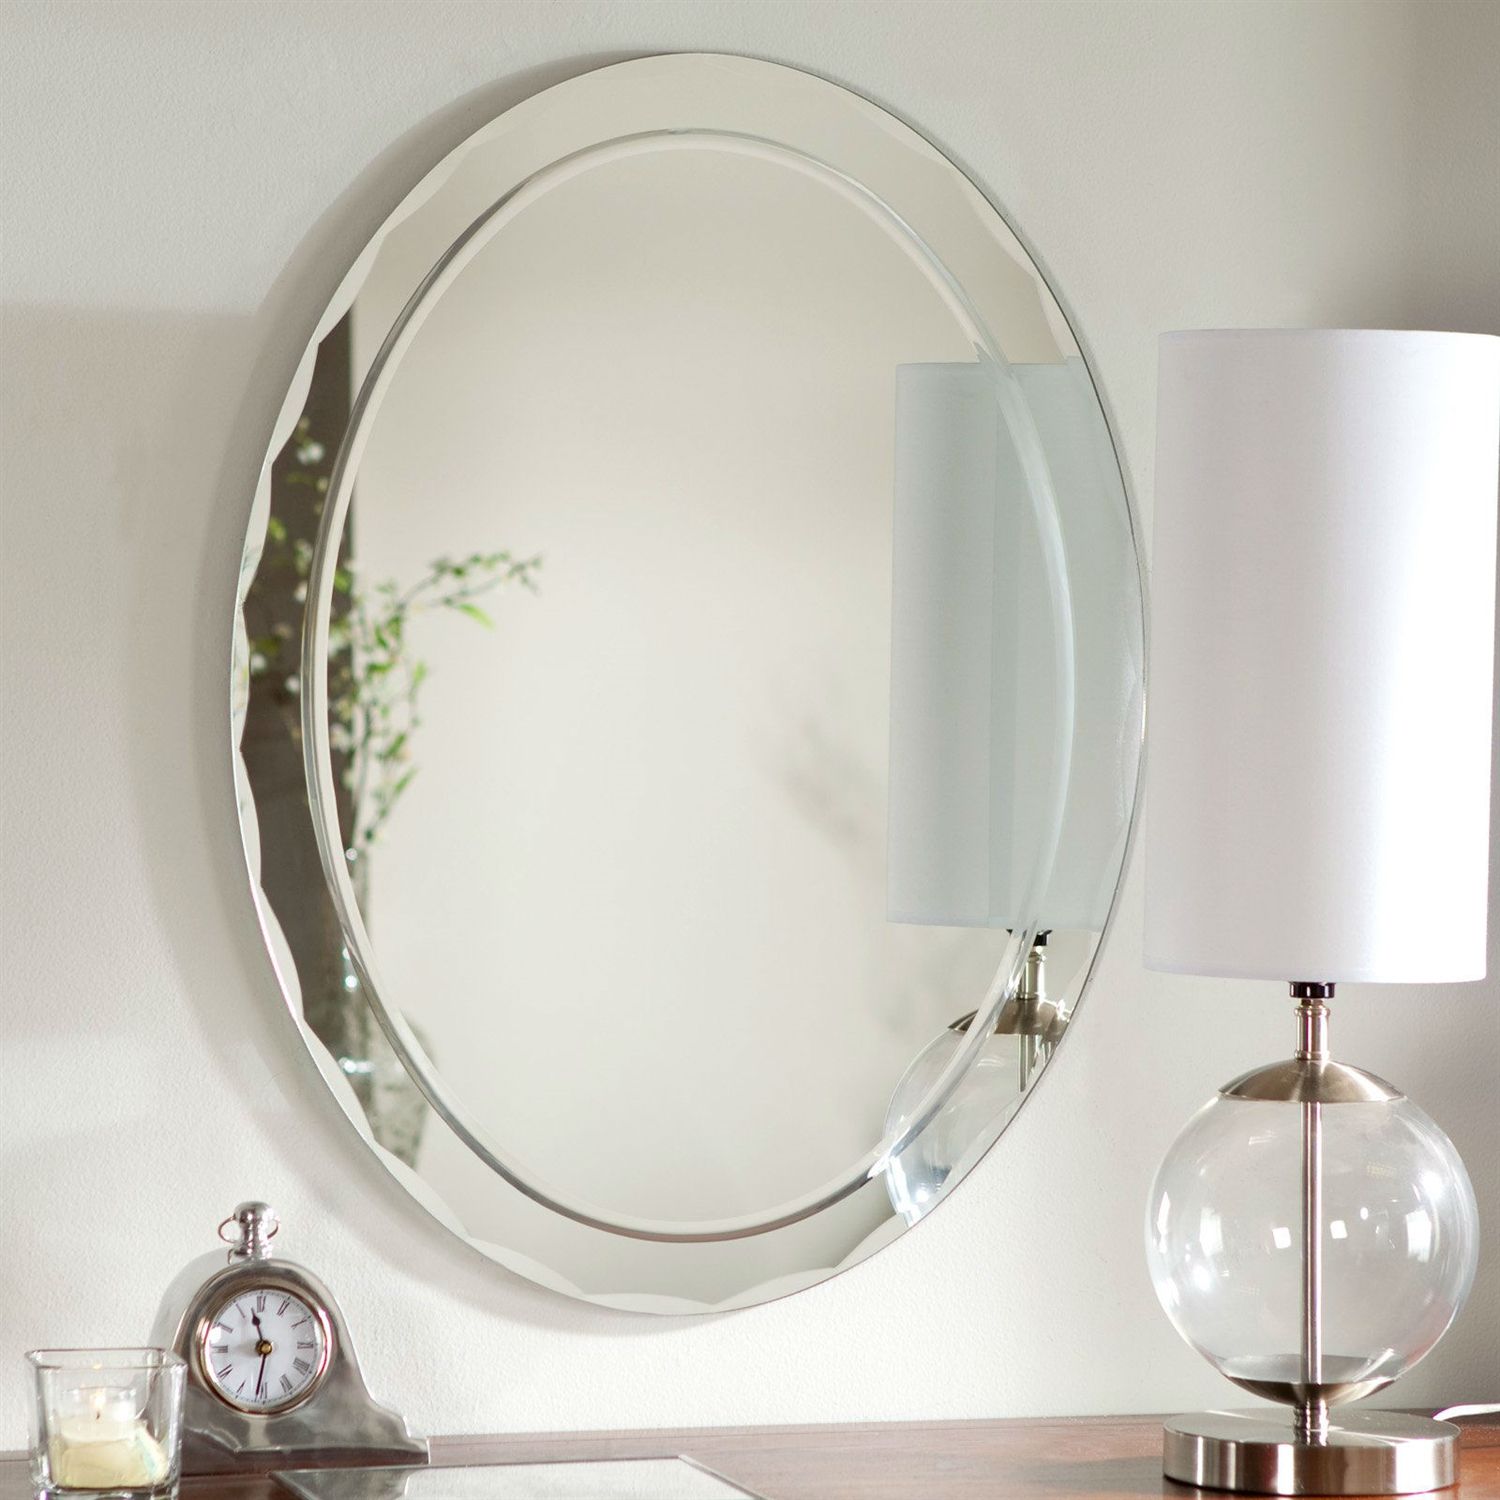 Oval Frameless Bathroom Vanity Wall Mirror With Beveled Edge Scallop Border Inside Frameless Tri Bevel Wall Mirrors (View 12 of 15)